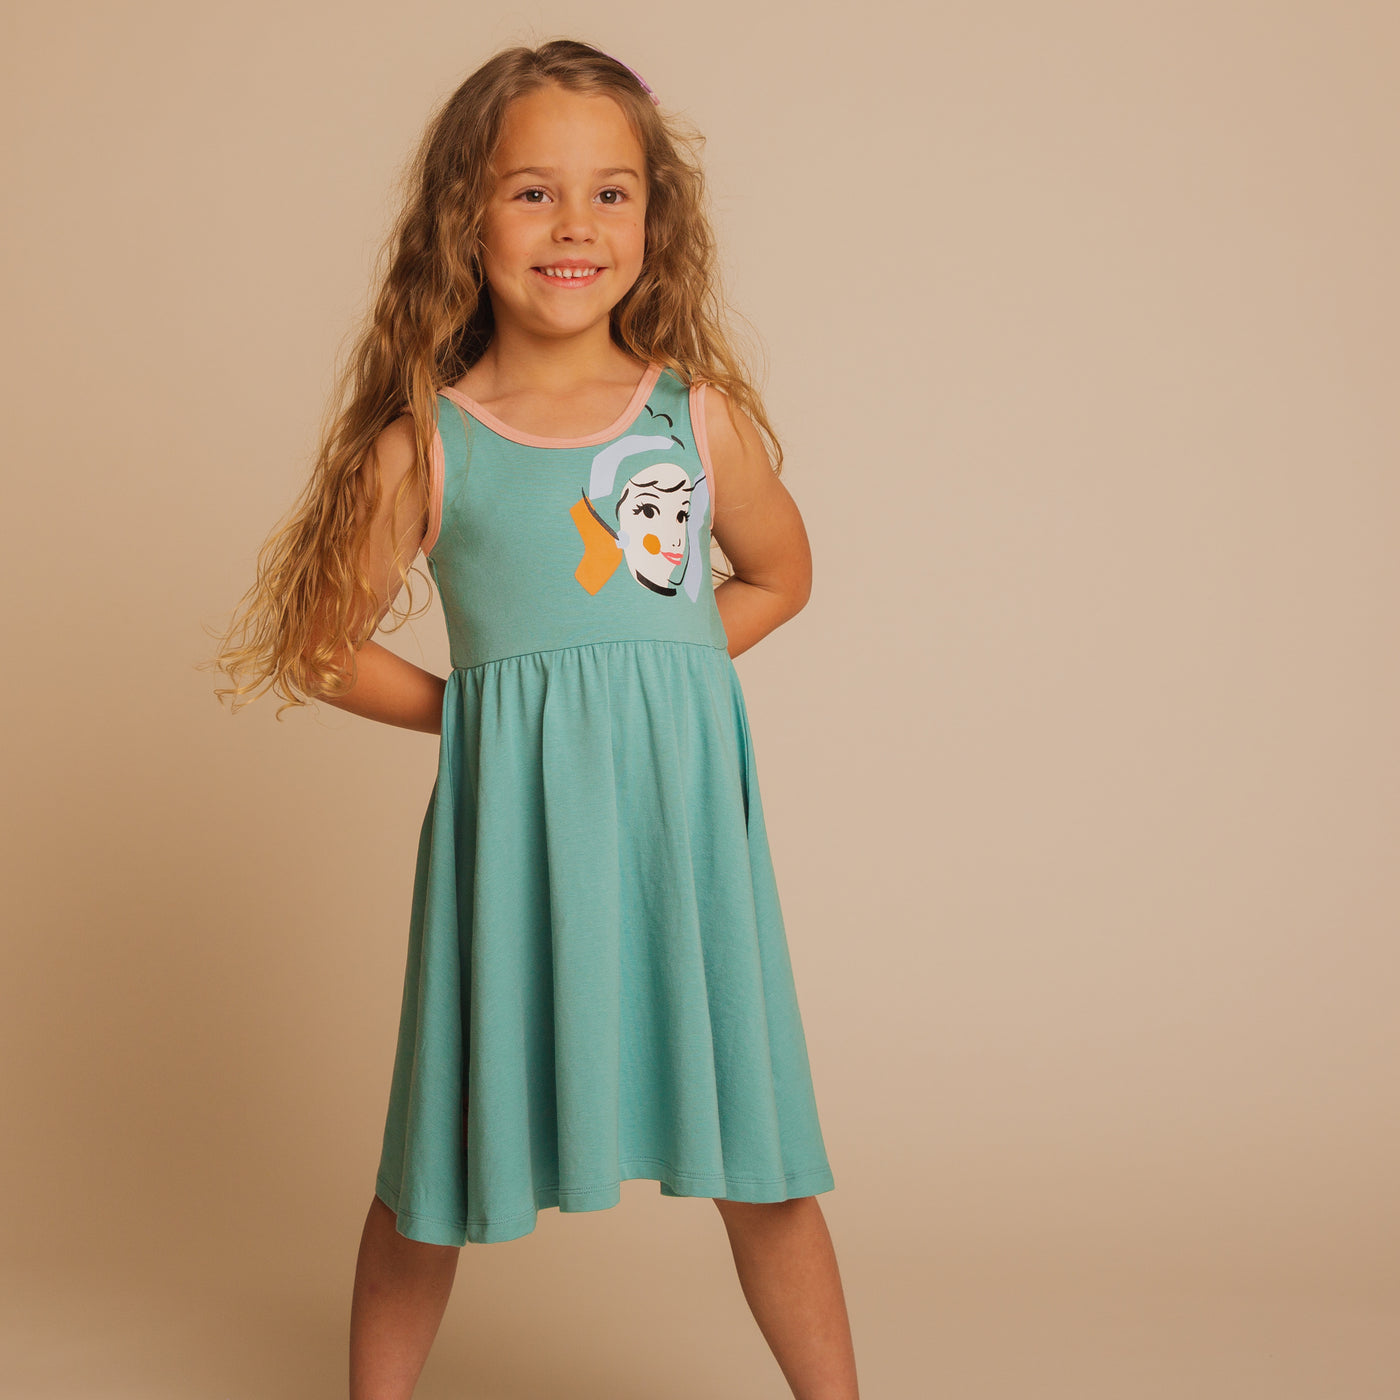 Tank Swing Dress - 'Cinderella' - Disney Princess Collection from RAGS